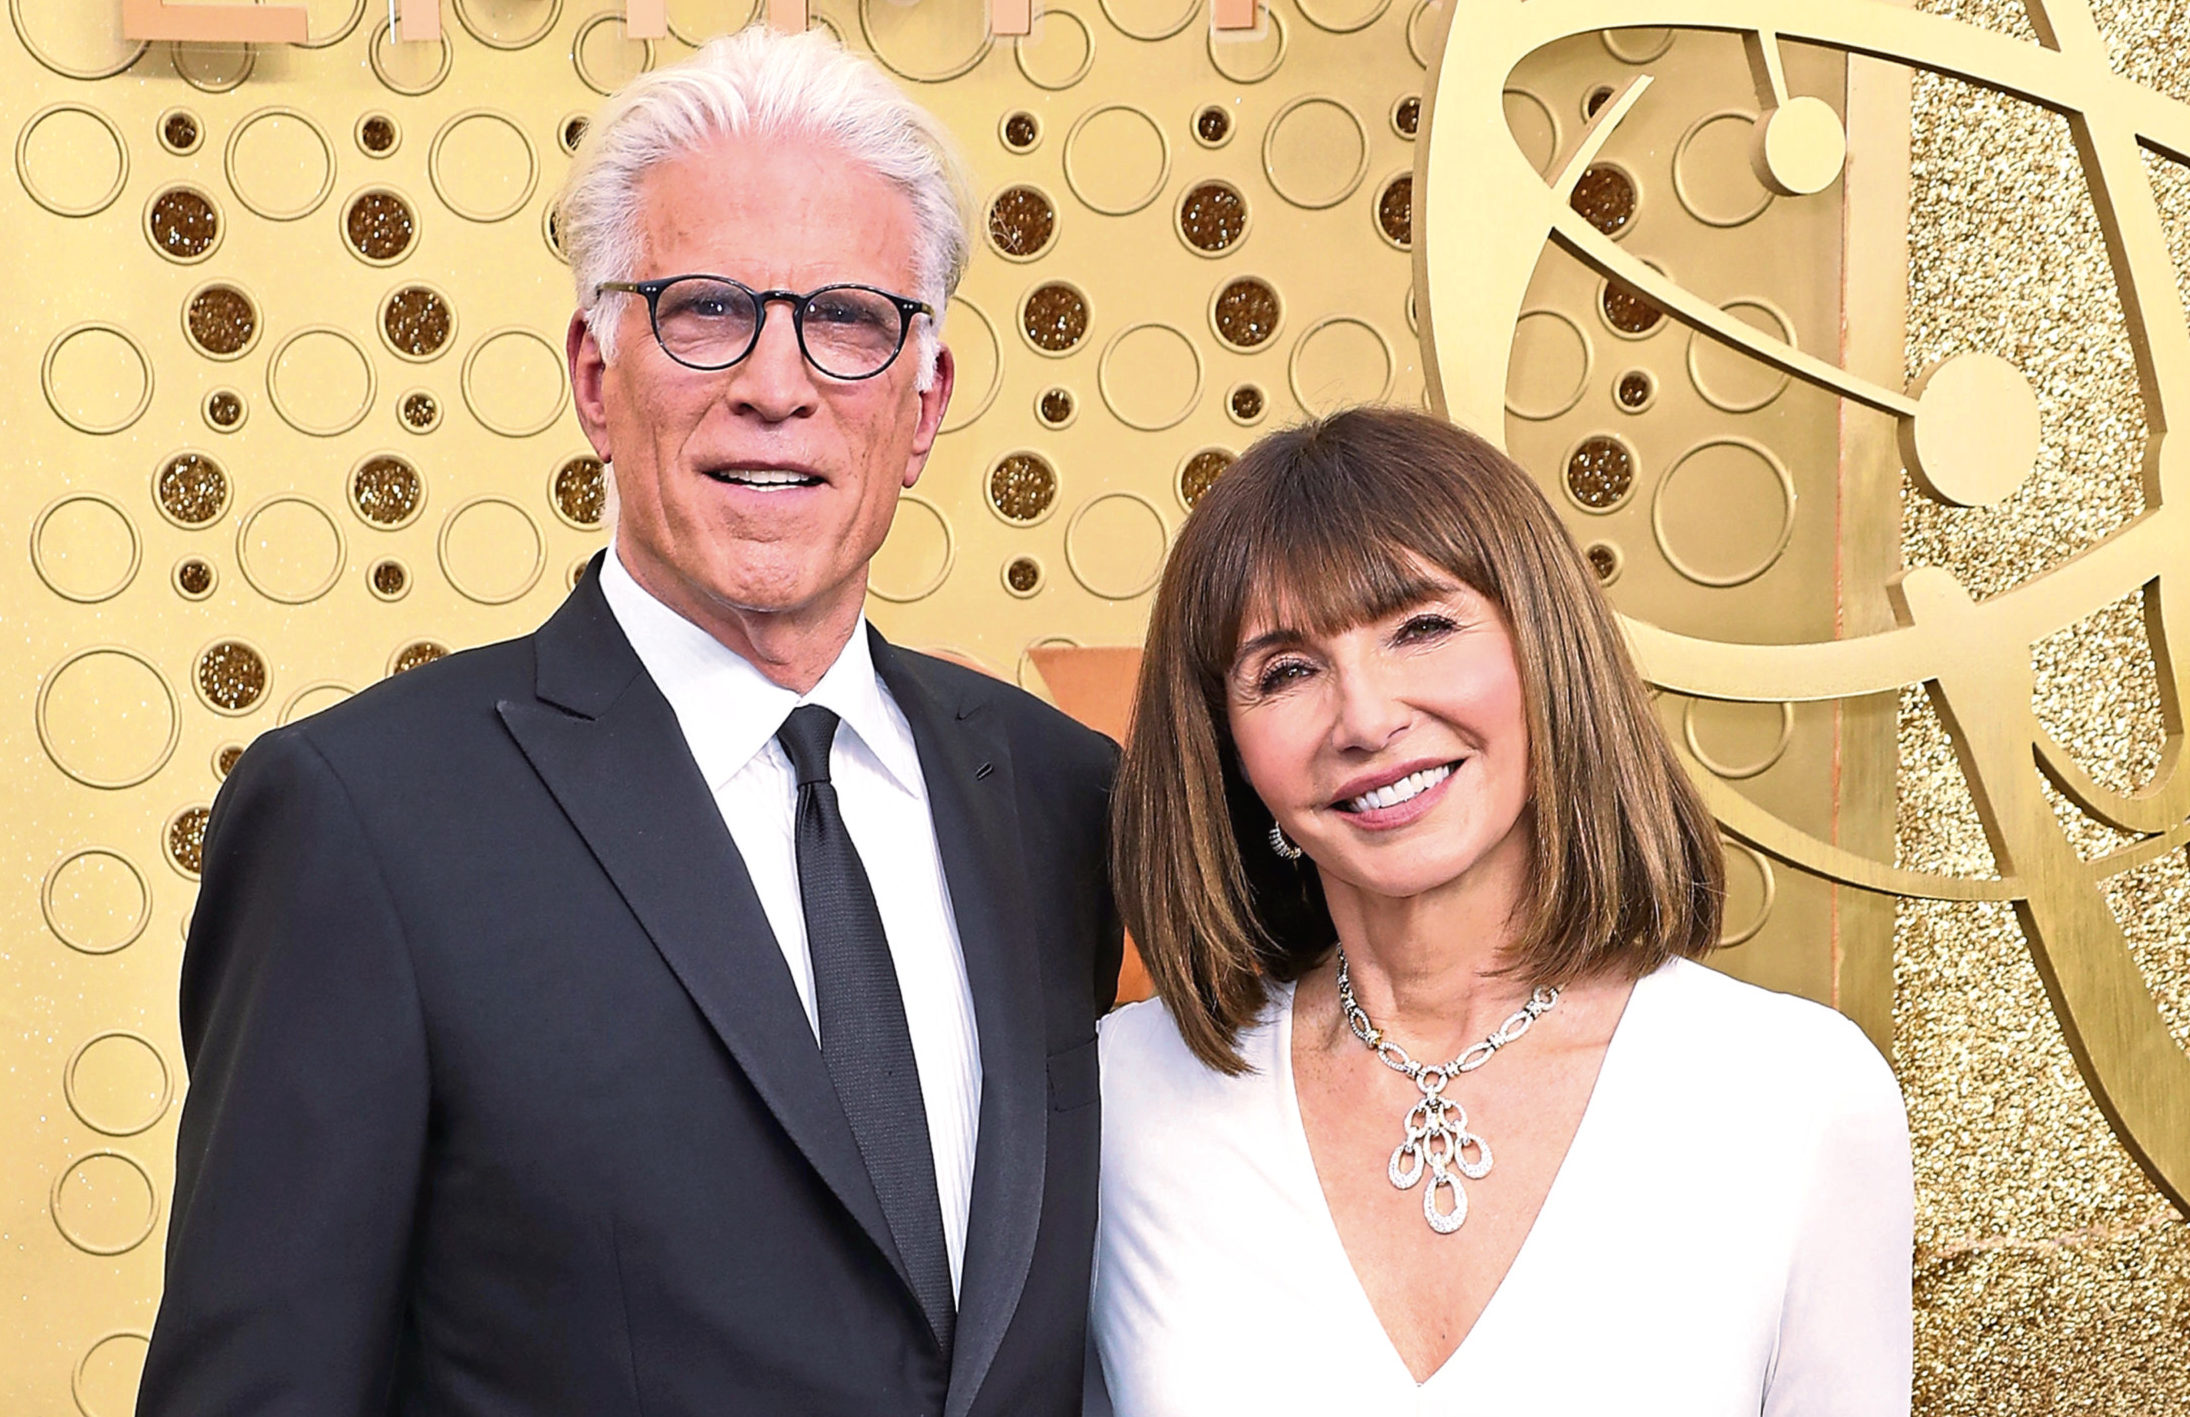 Ted Danson and Mary Steenburgen at the Emmys